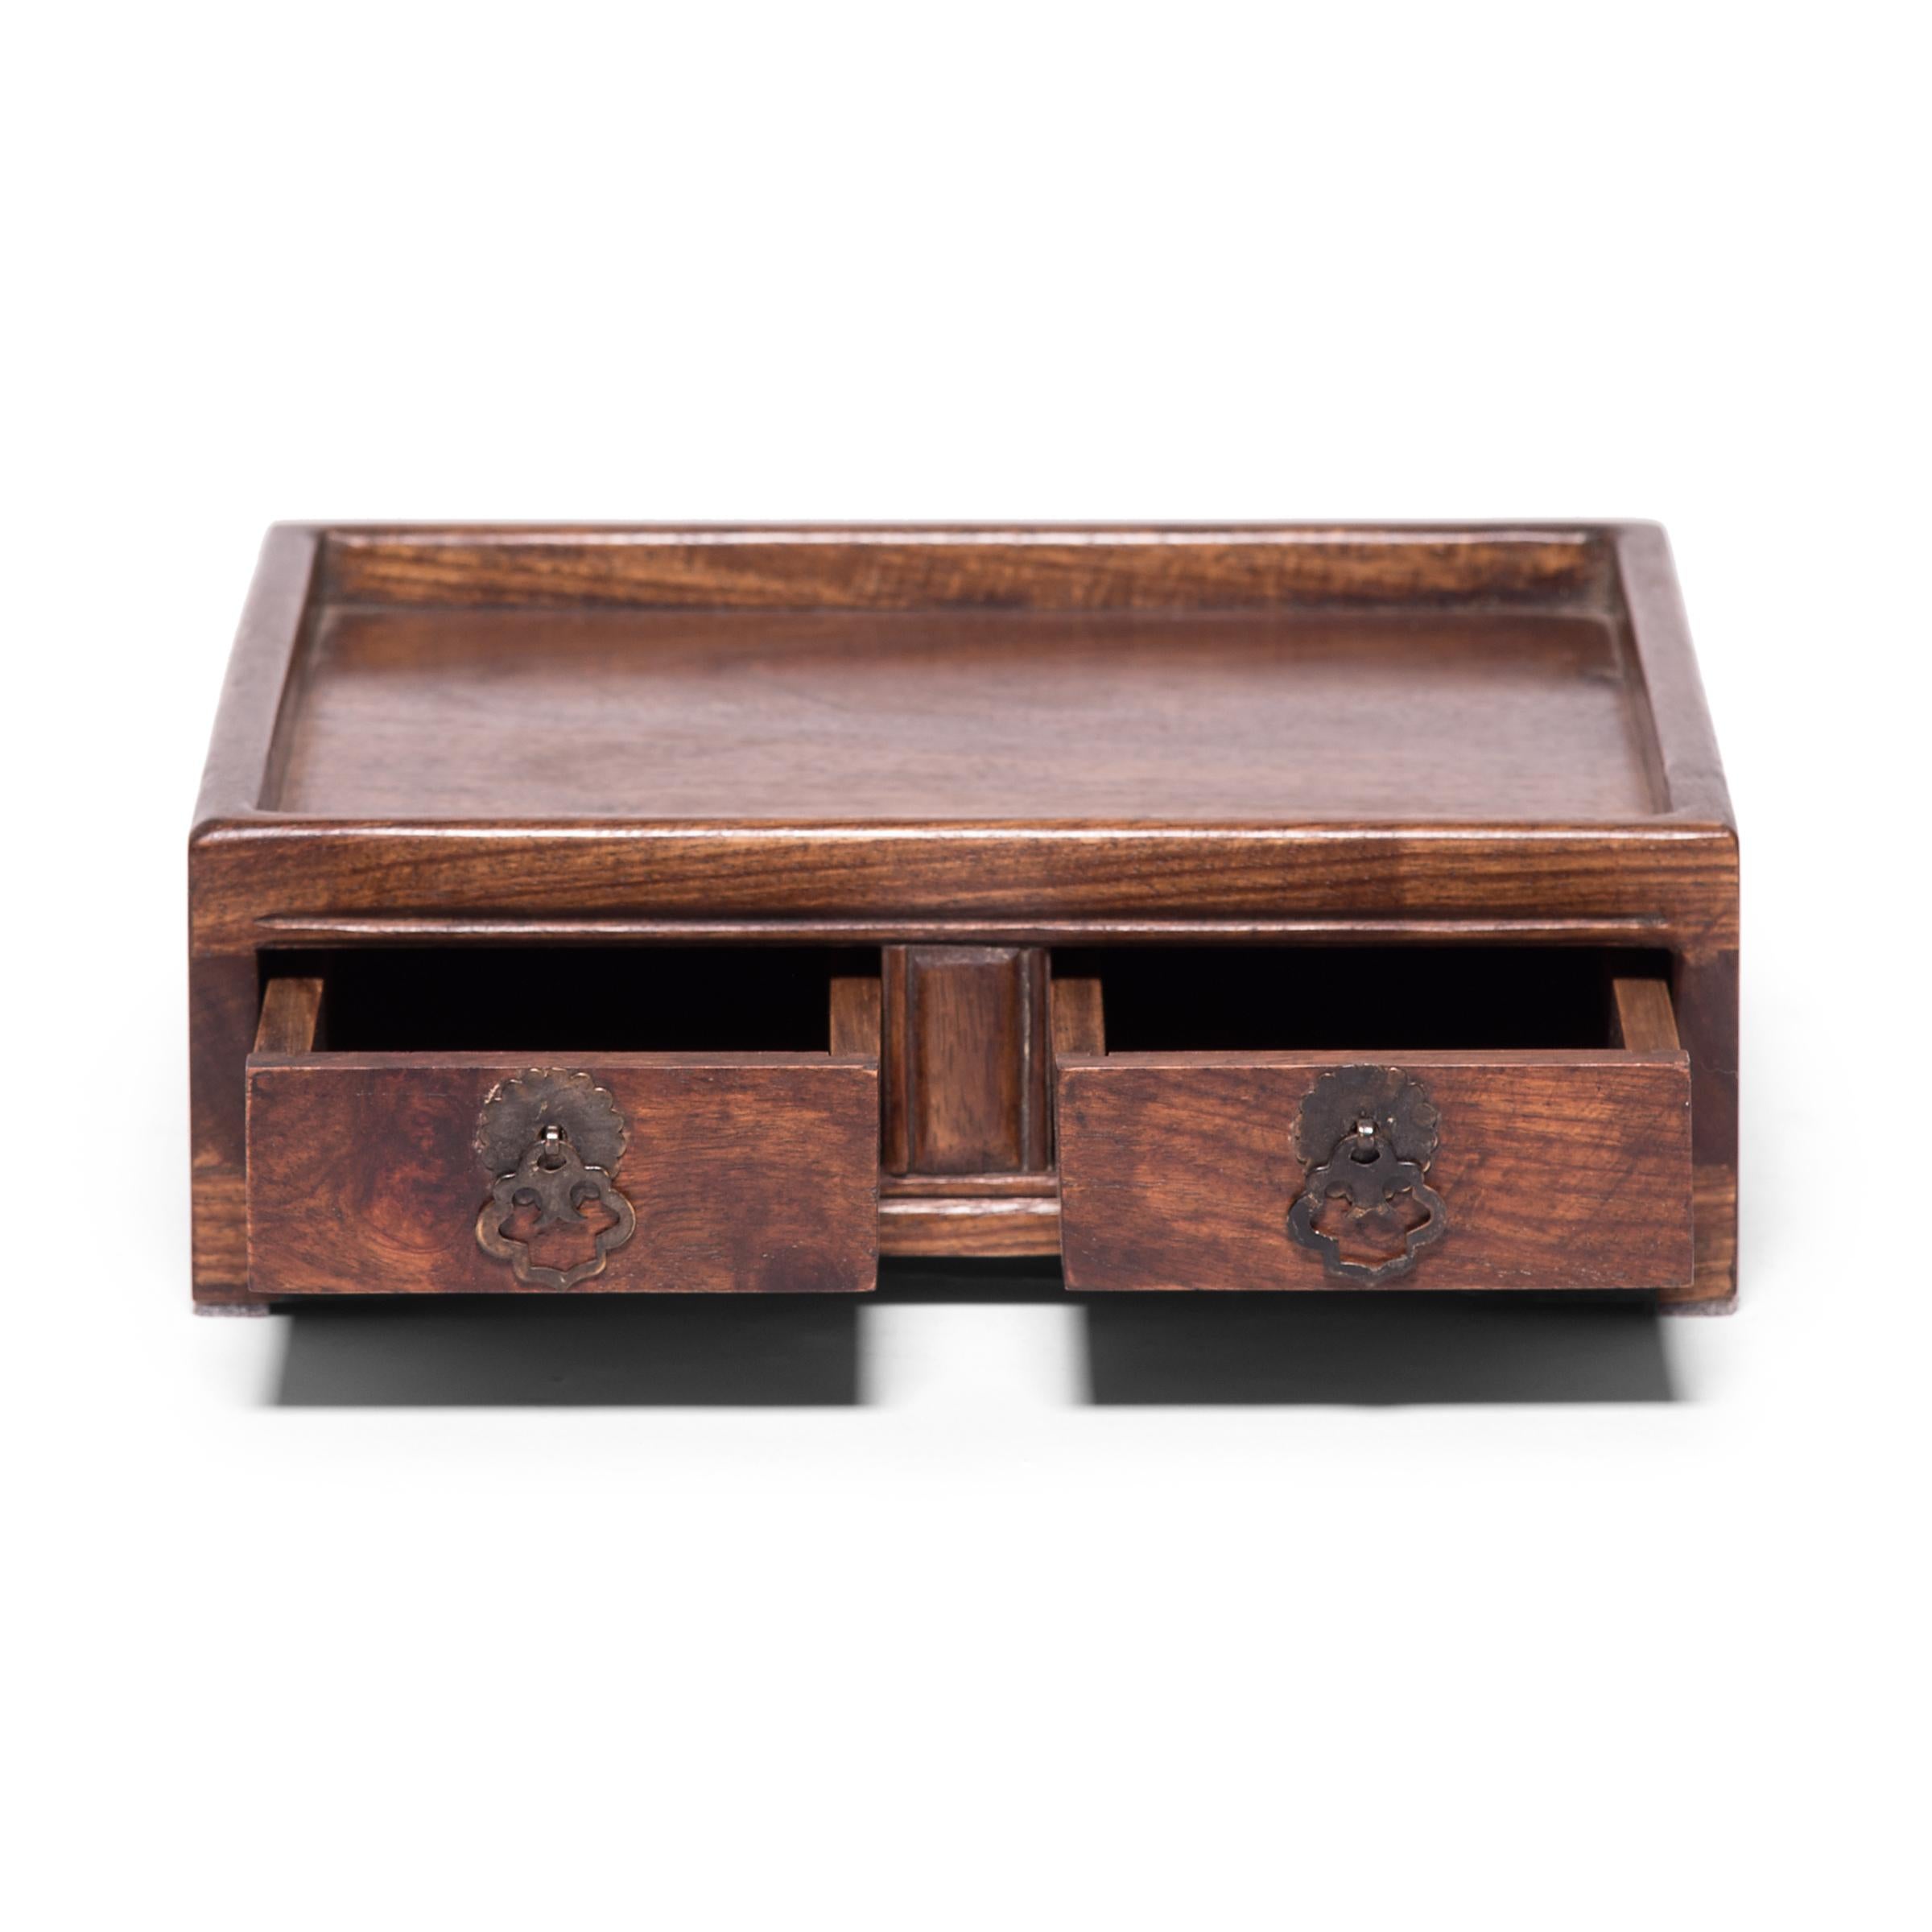 Crafted of a fine hardwood, this early 20th century incense tray is an example of the multi-functional boxes used tabletop in lieu of a chest of drawers. While some were used to store cosmetics, jewelry, documents, and other accessories, the small